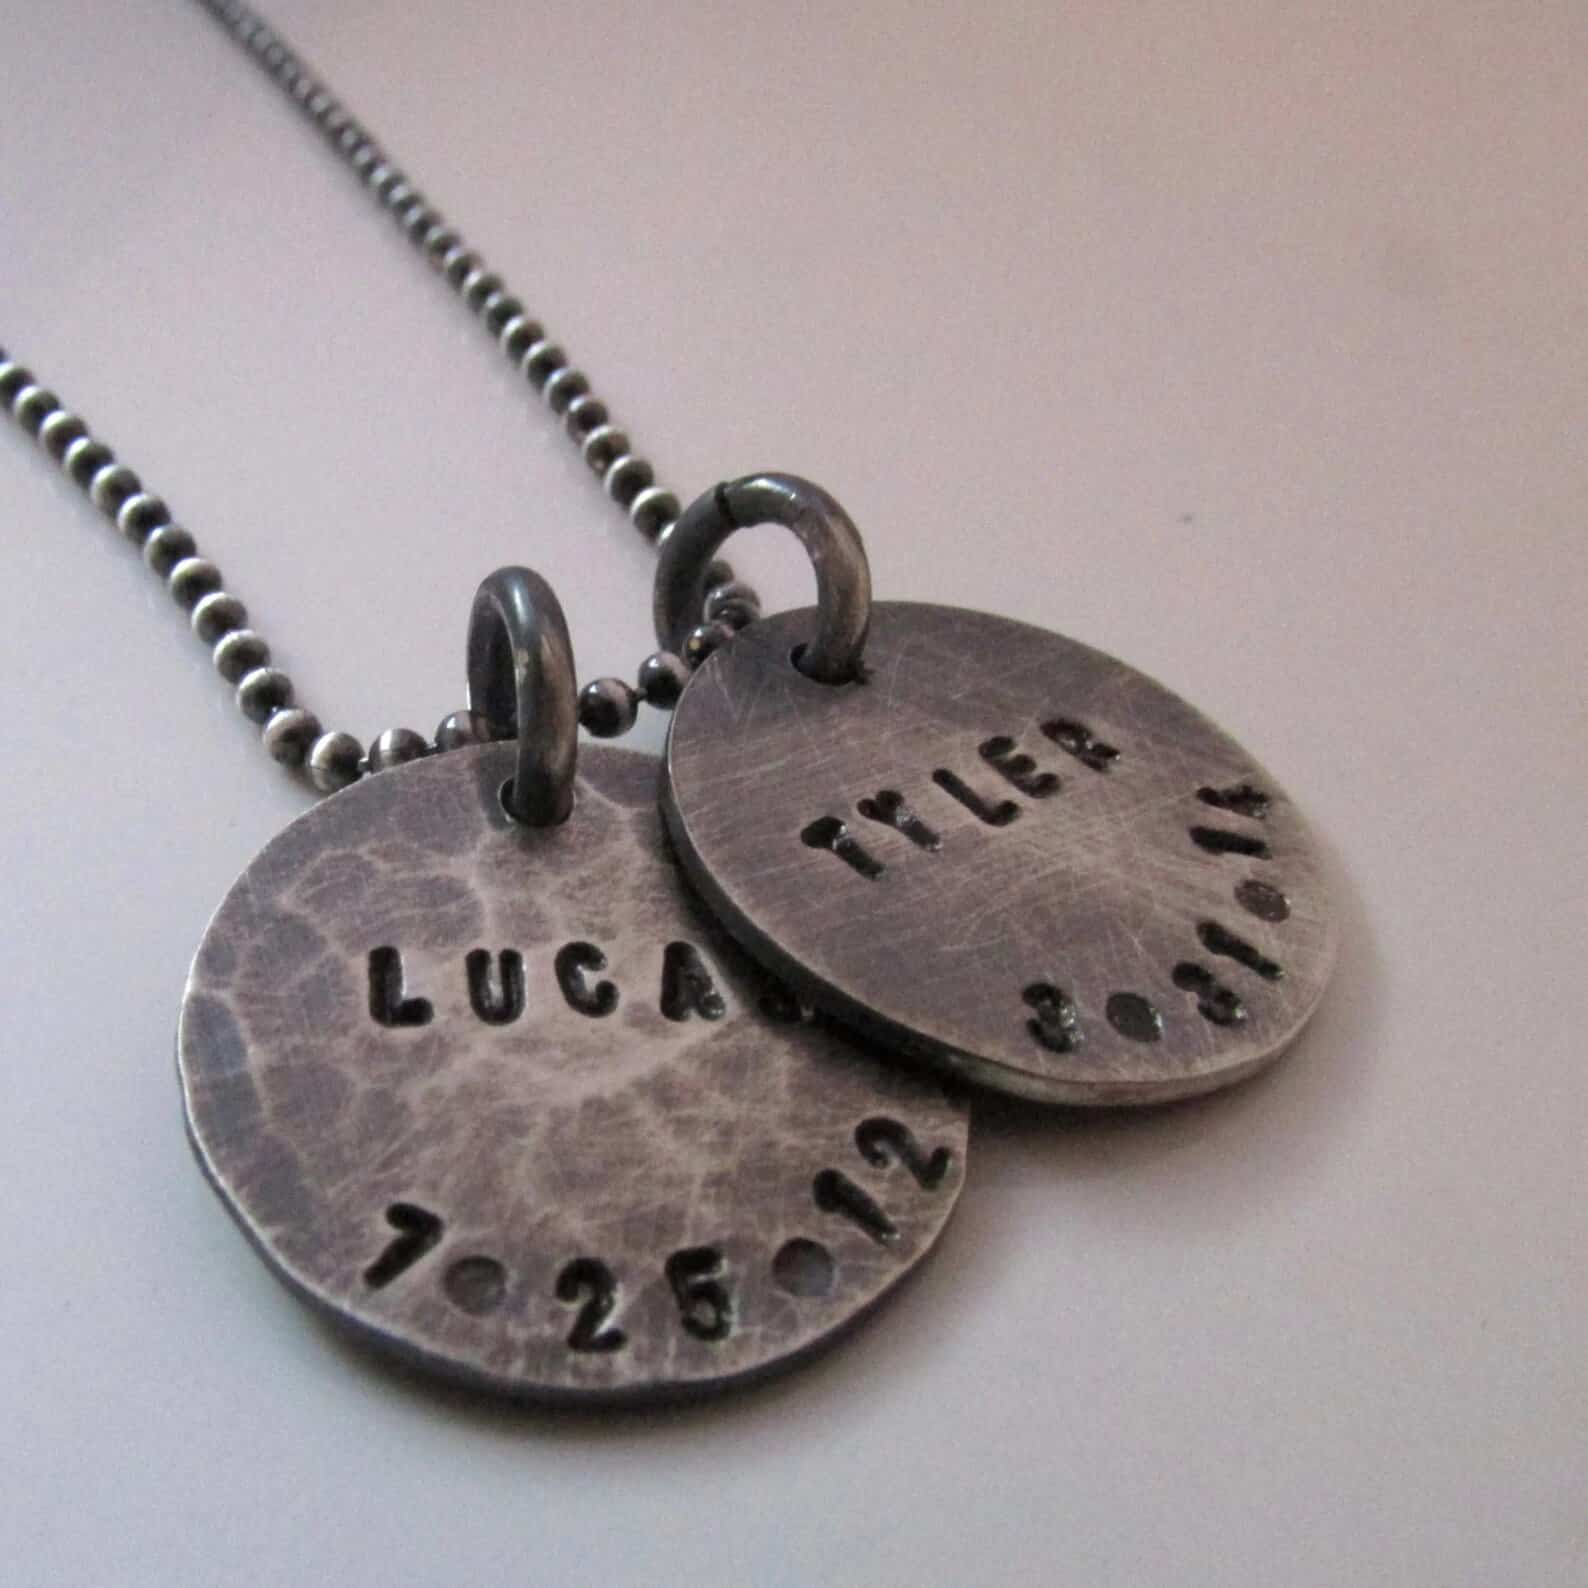 Rustic Personalized Necklace: Father's day gifts for your brother